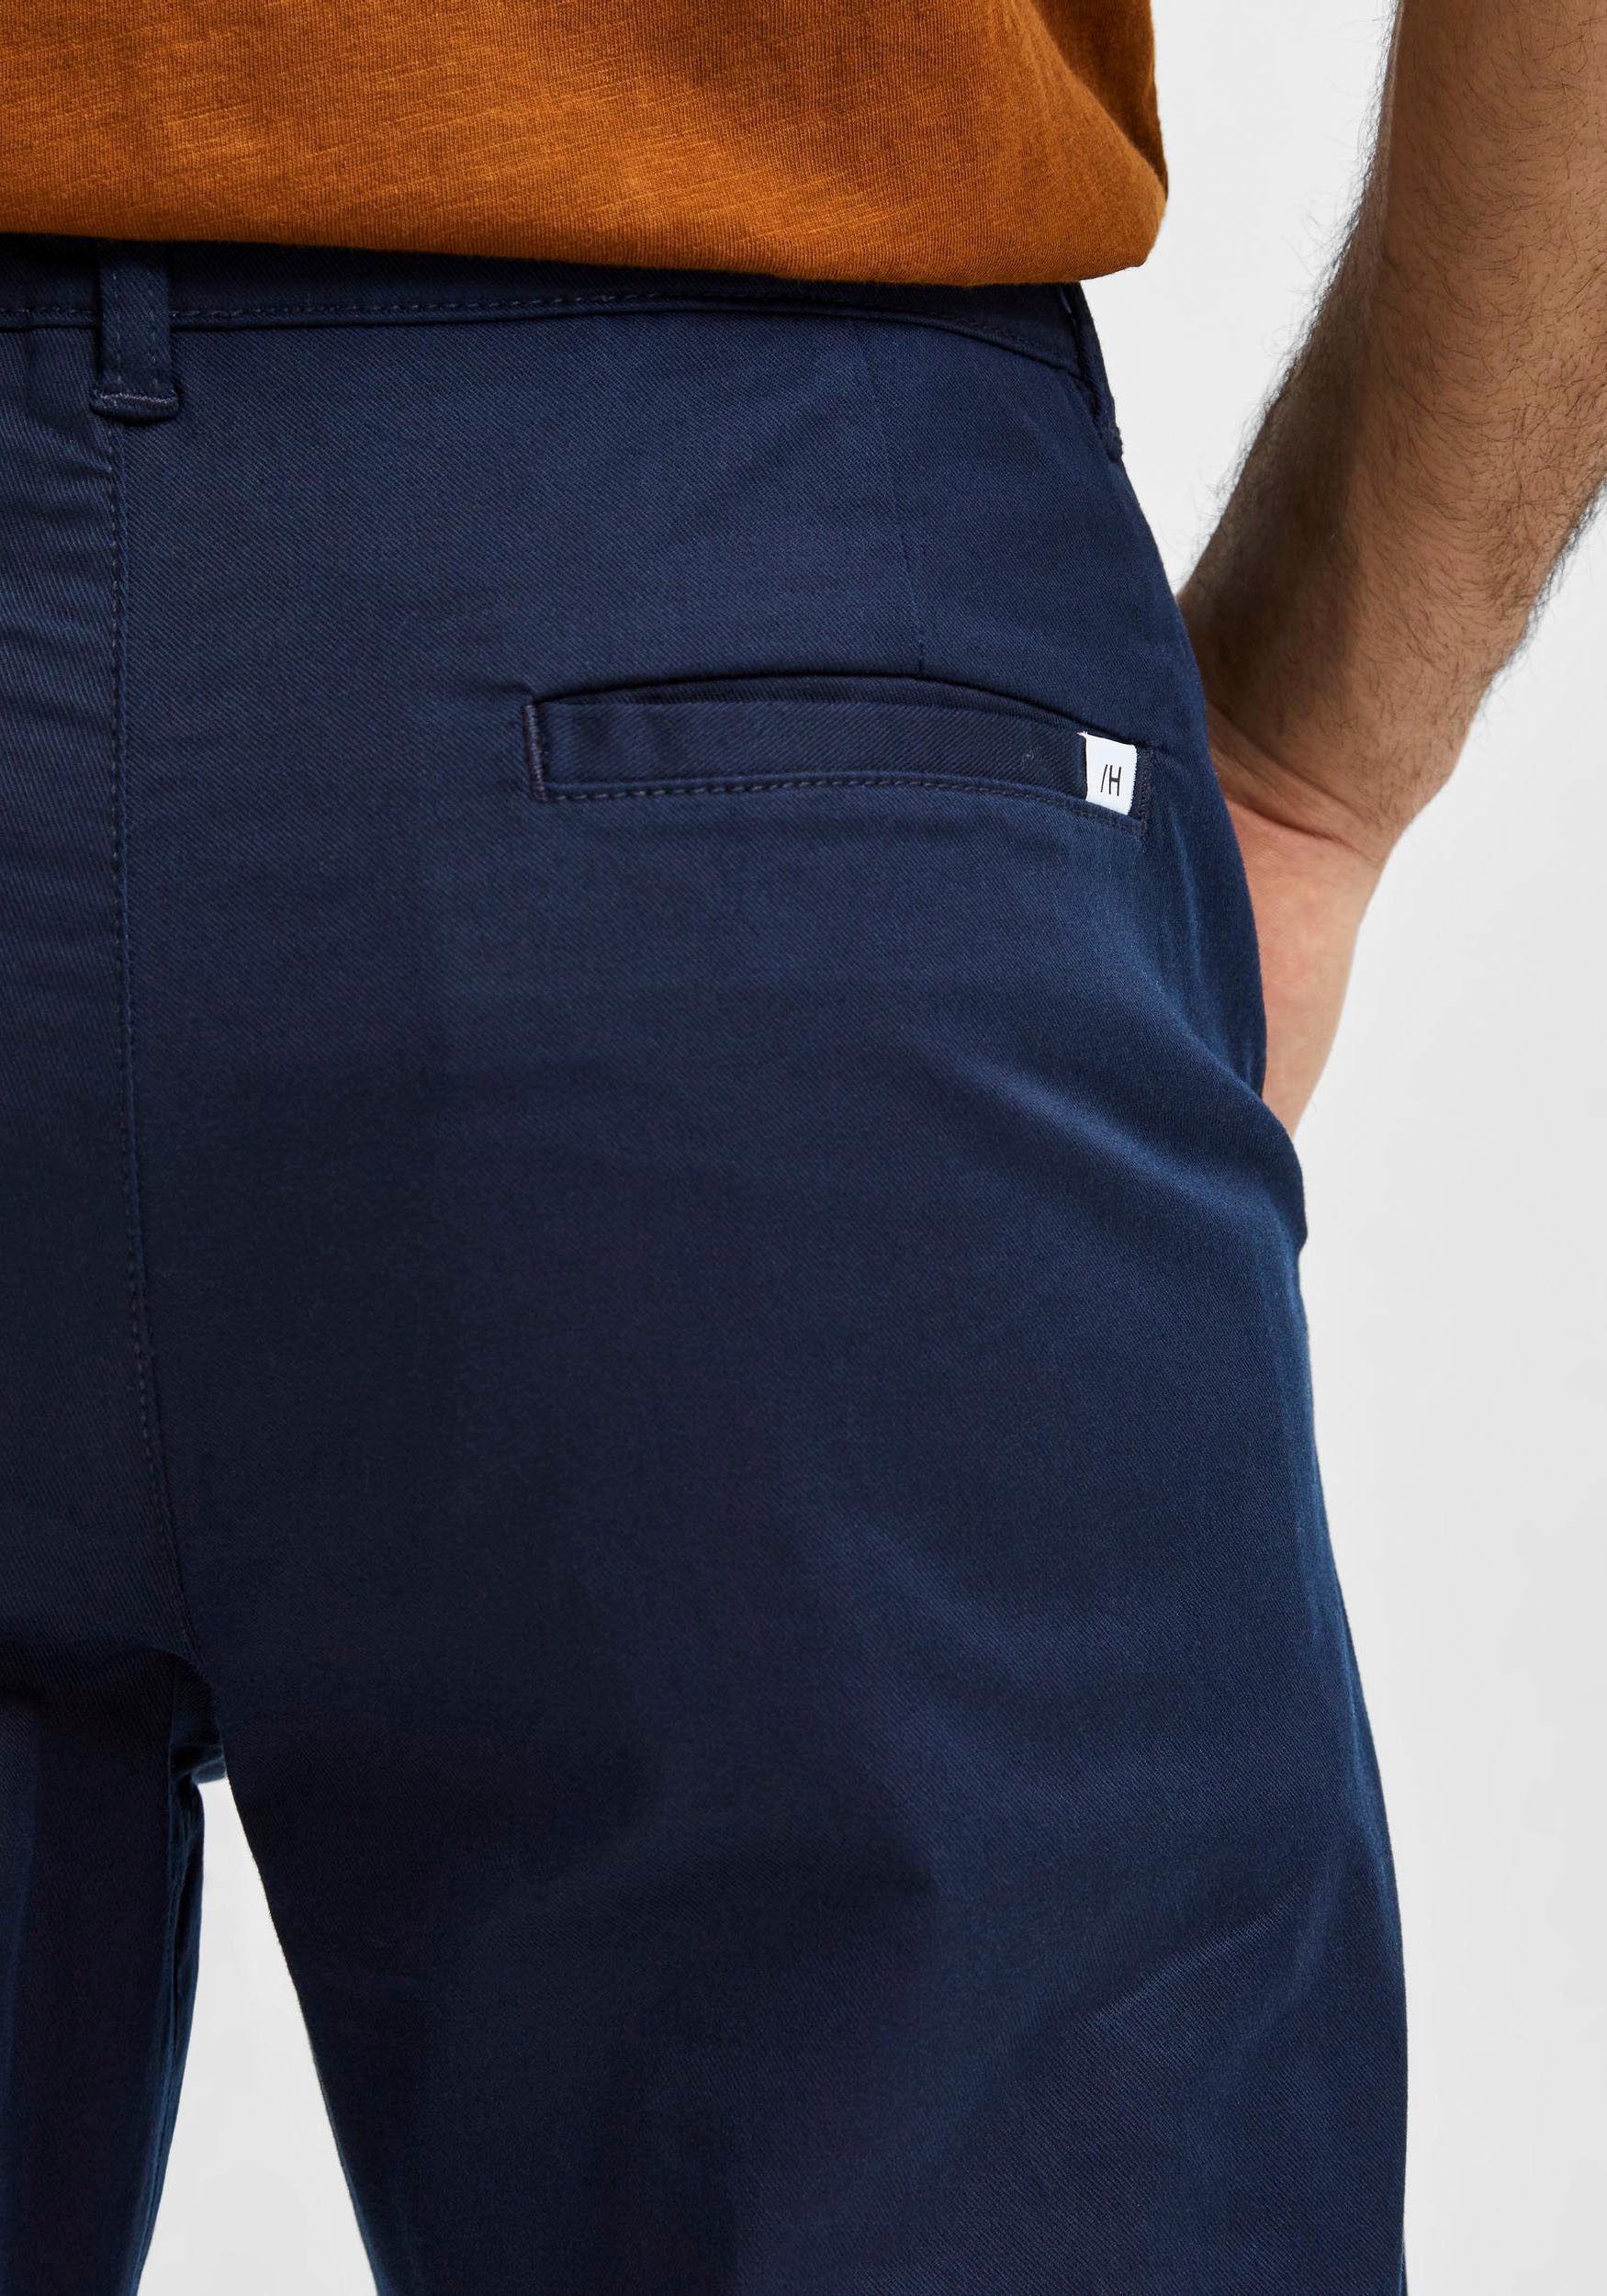 SELECTED HOMME Chinohose im Chino« »SE Online-Shop bestellen